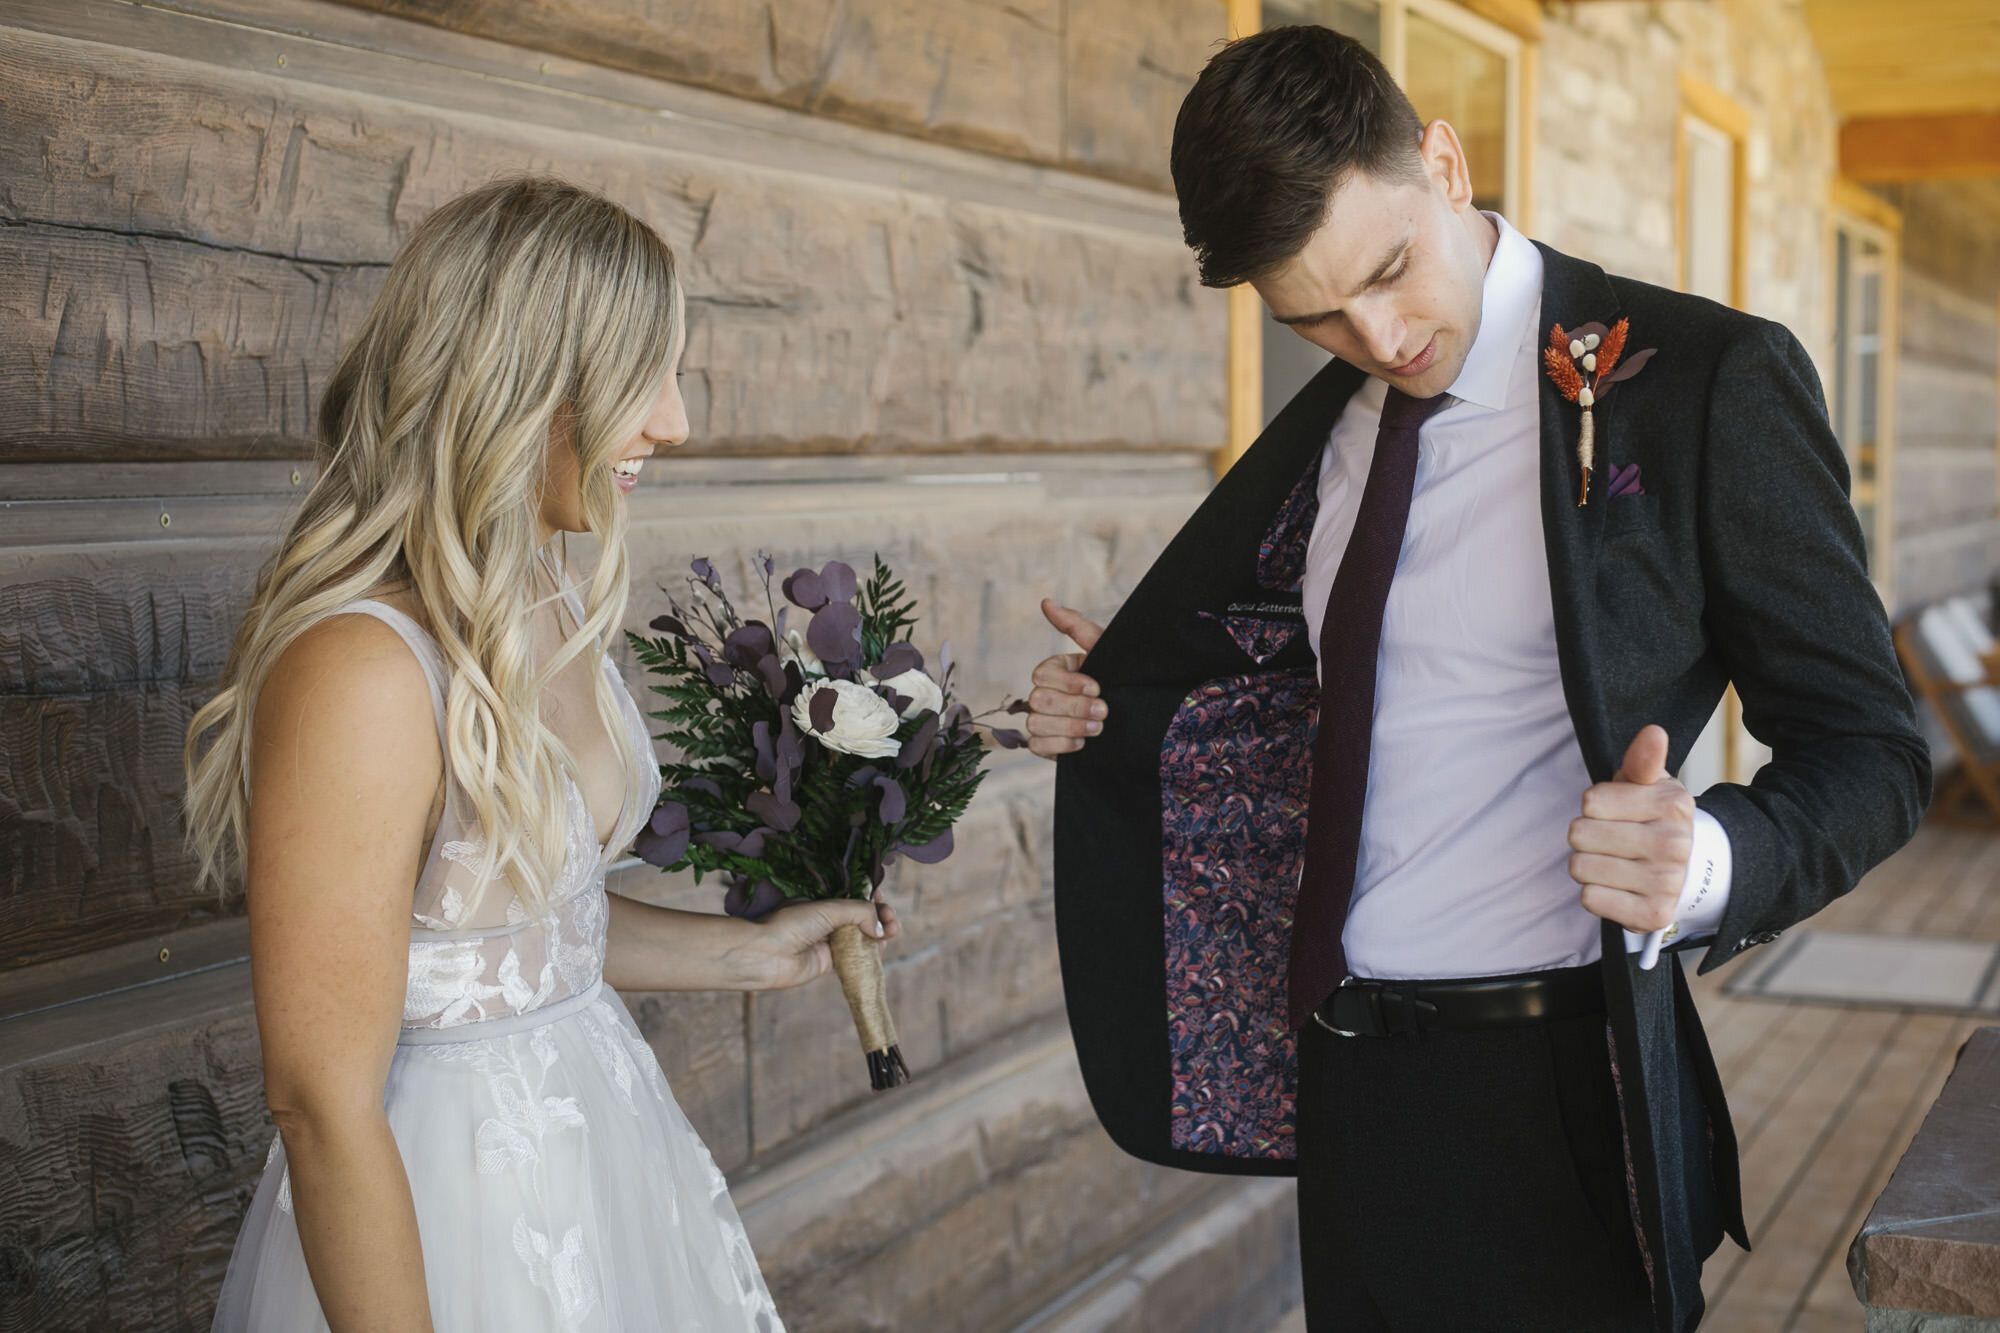 Groom shows off the custom liner of his wedding suit jacket